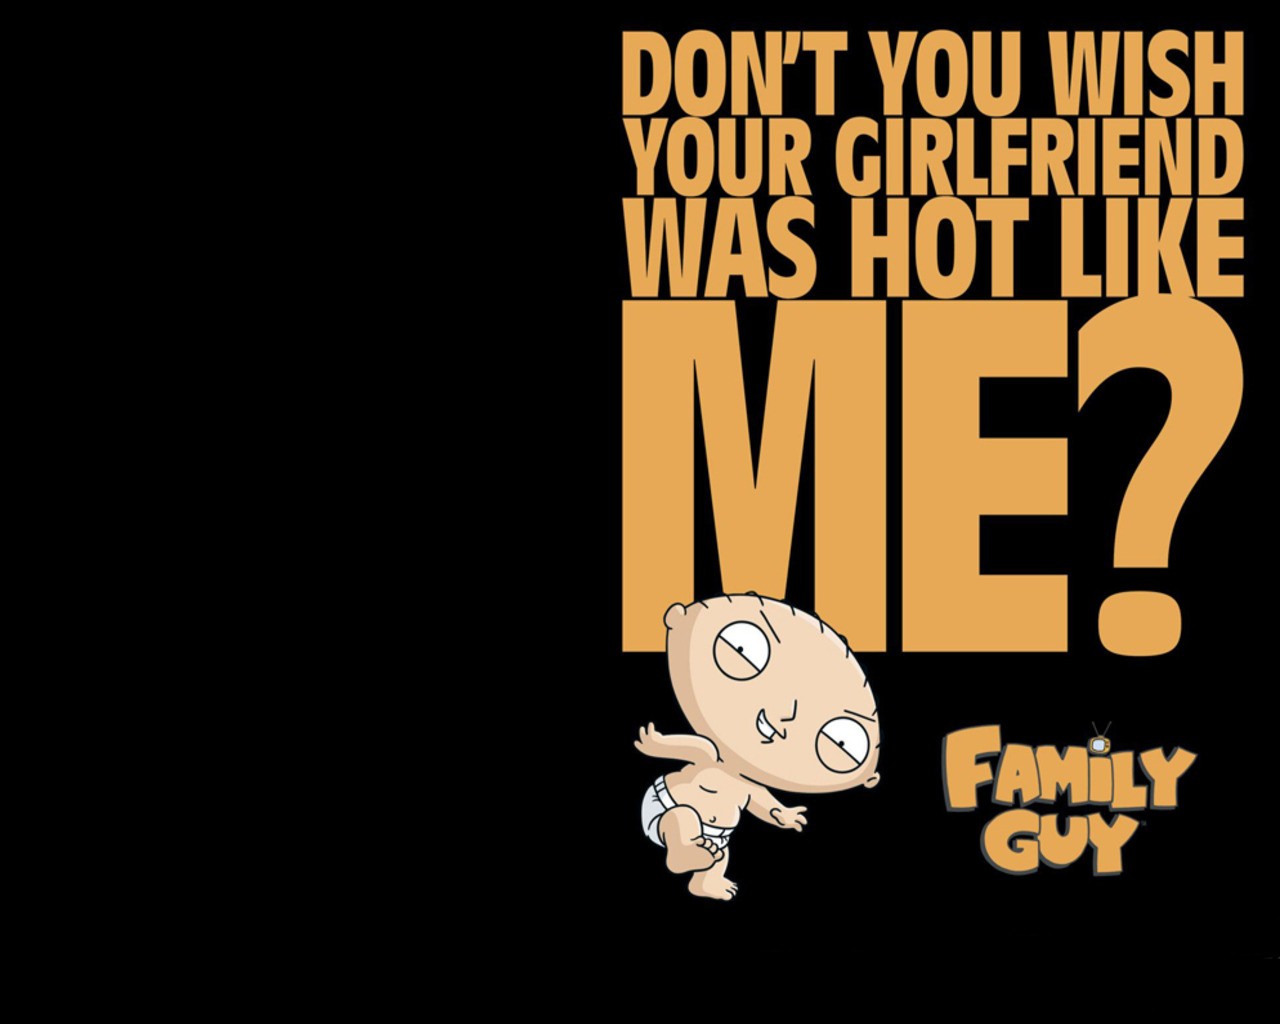 stewie griffin, family guy, tv show cell phone wallpapers